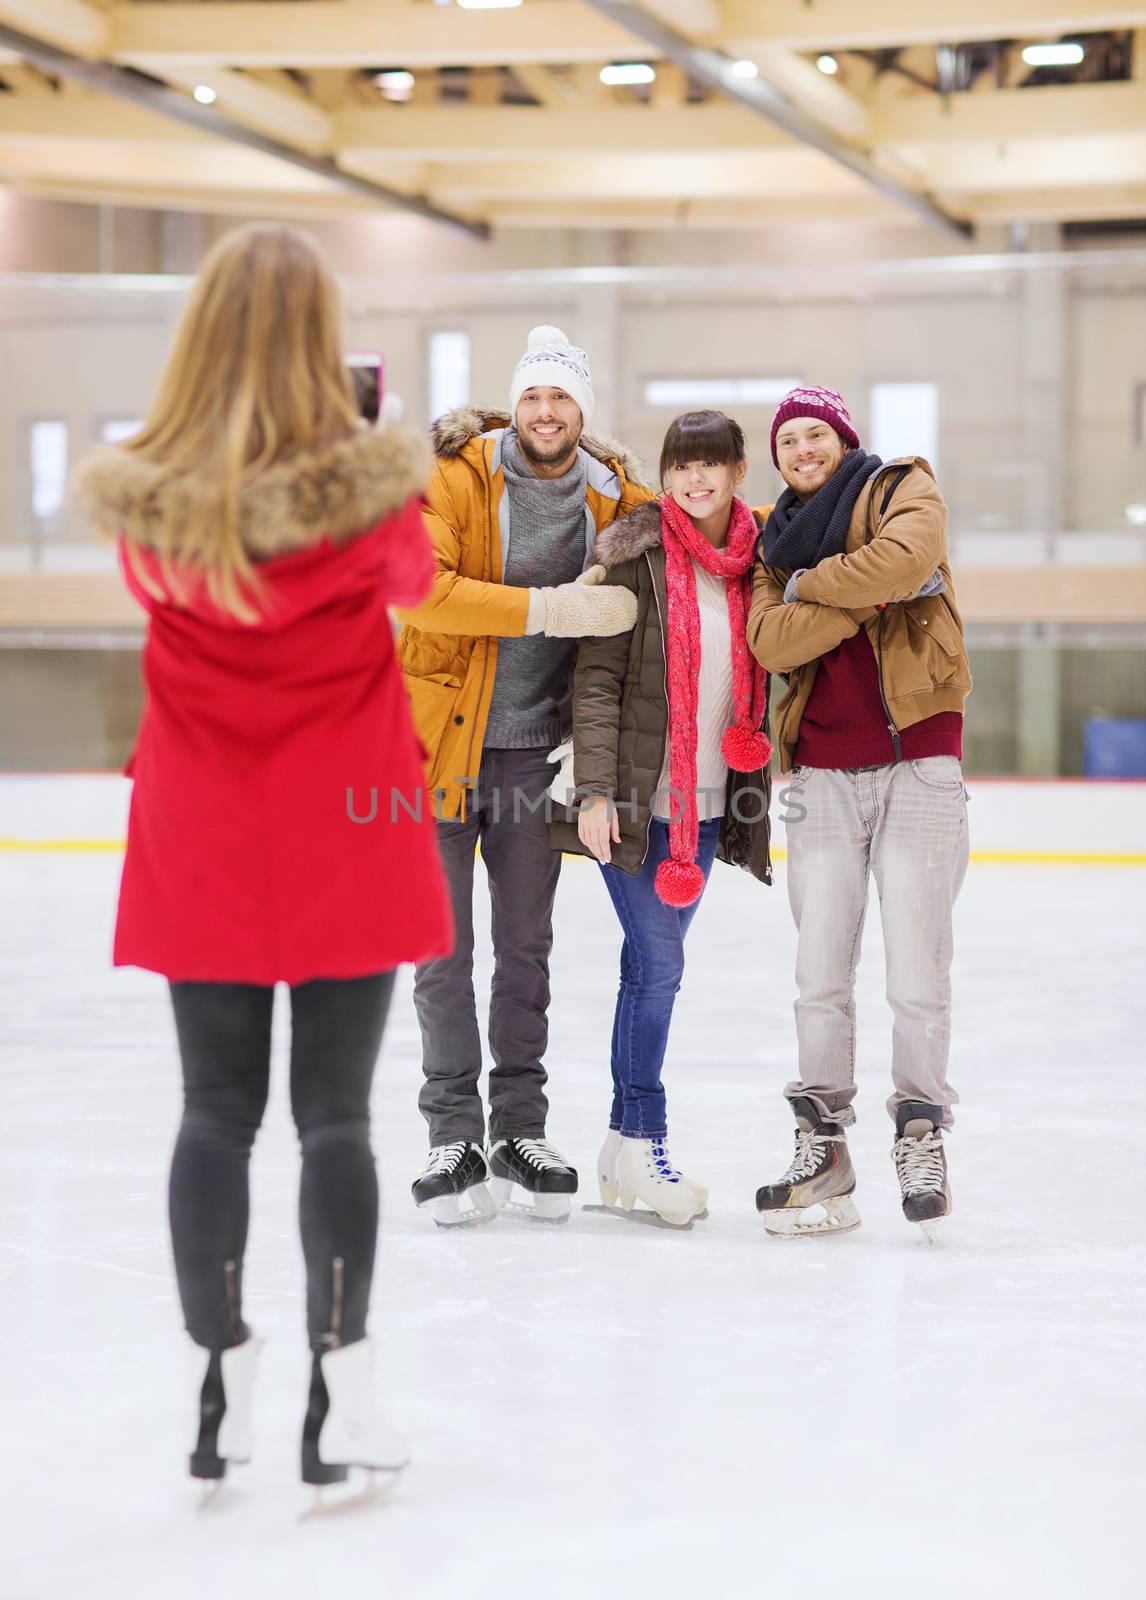 people, friendship, technology and leisure concept - happy friends taking photo with smartphone on skating rink